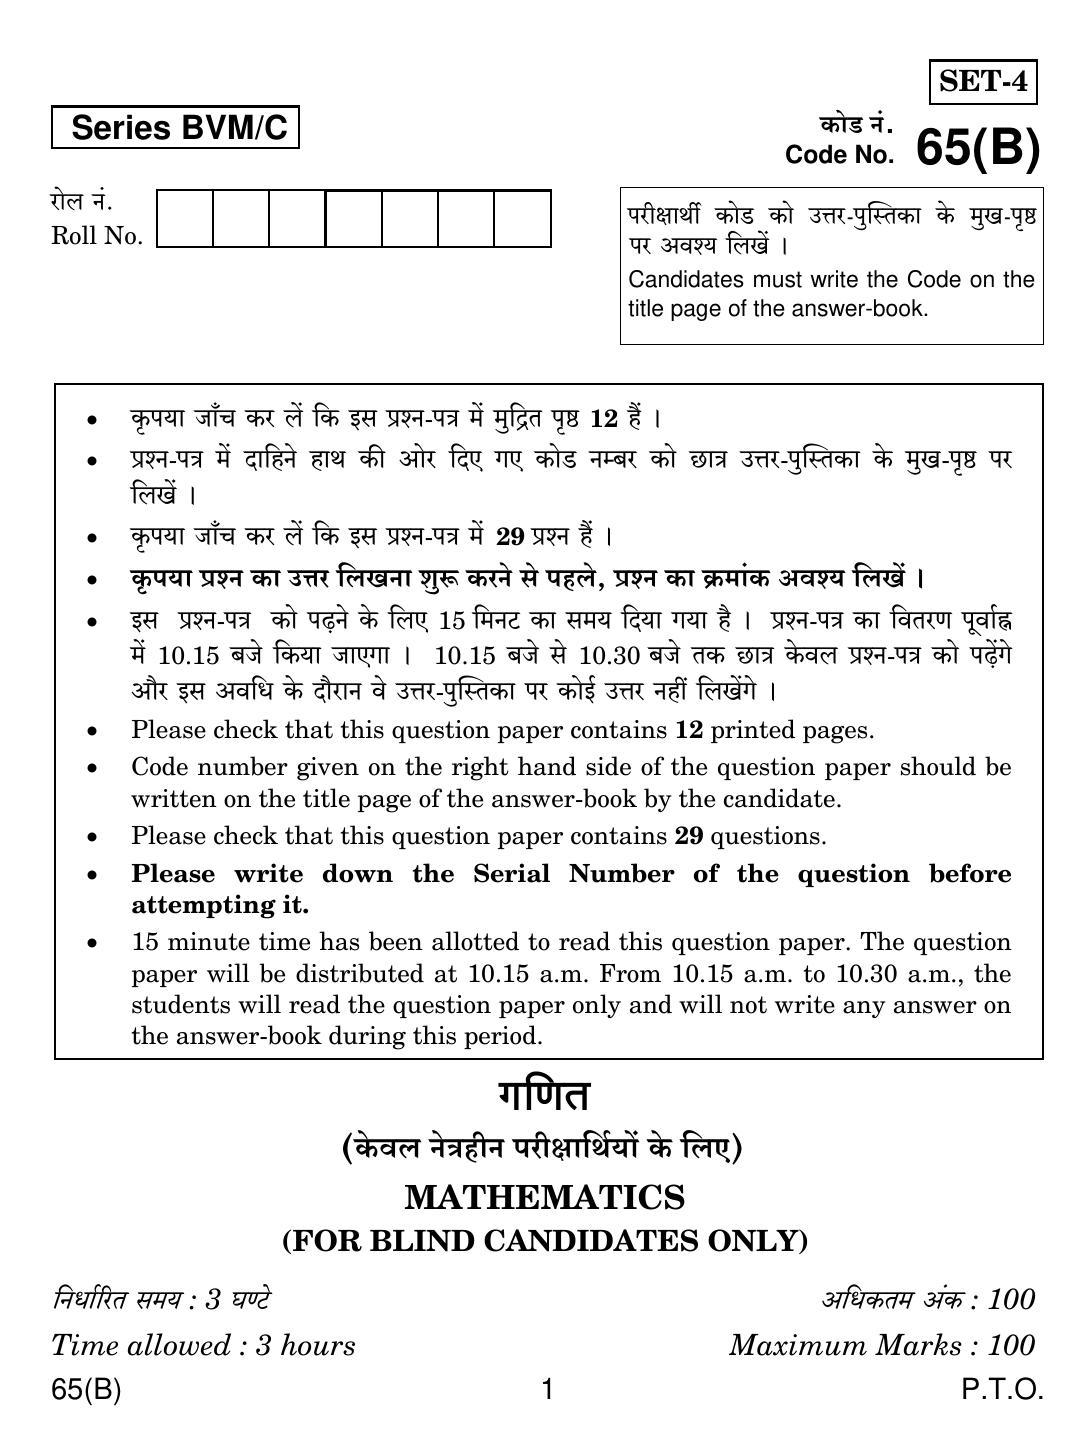 CBSE Class 12 65(B) MATHS For Blind Candidates 2019 Compartment Question Paper - Page 1